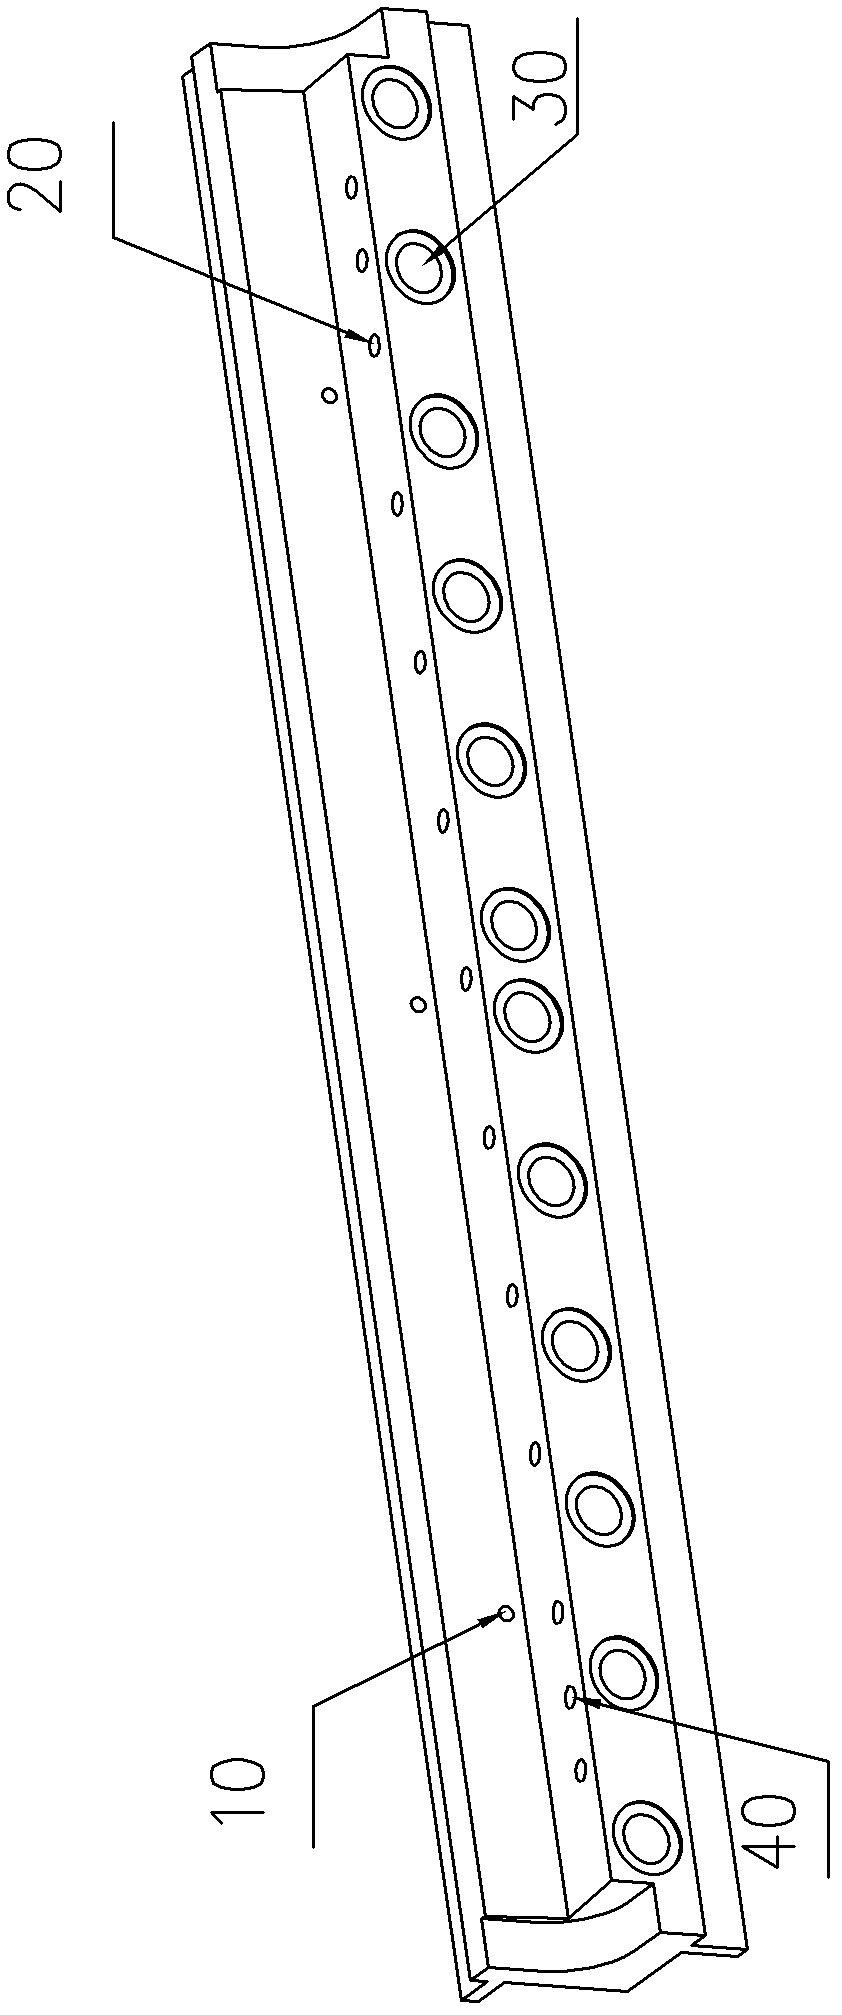 Preparation method of upper tool post of cold-rolled flying shear